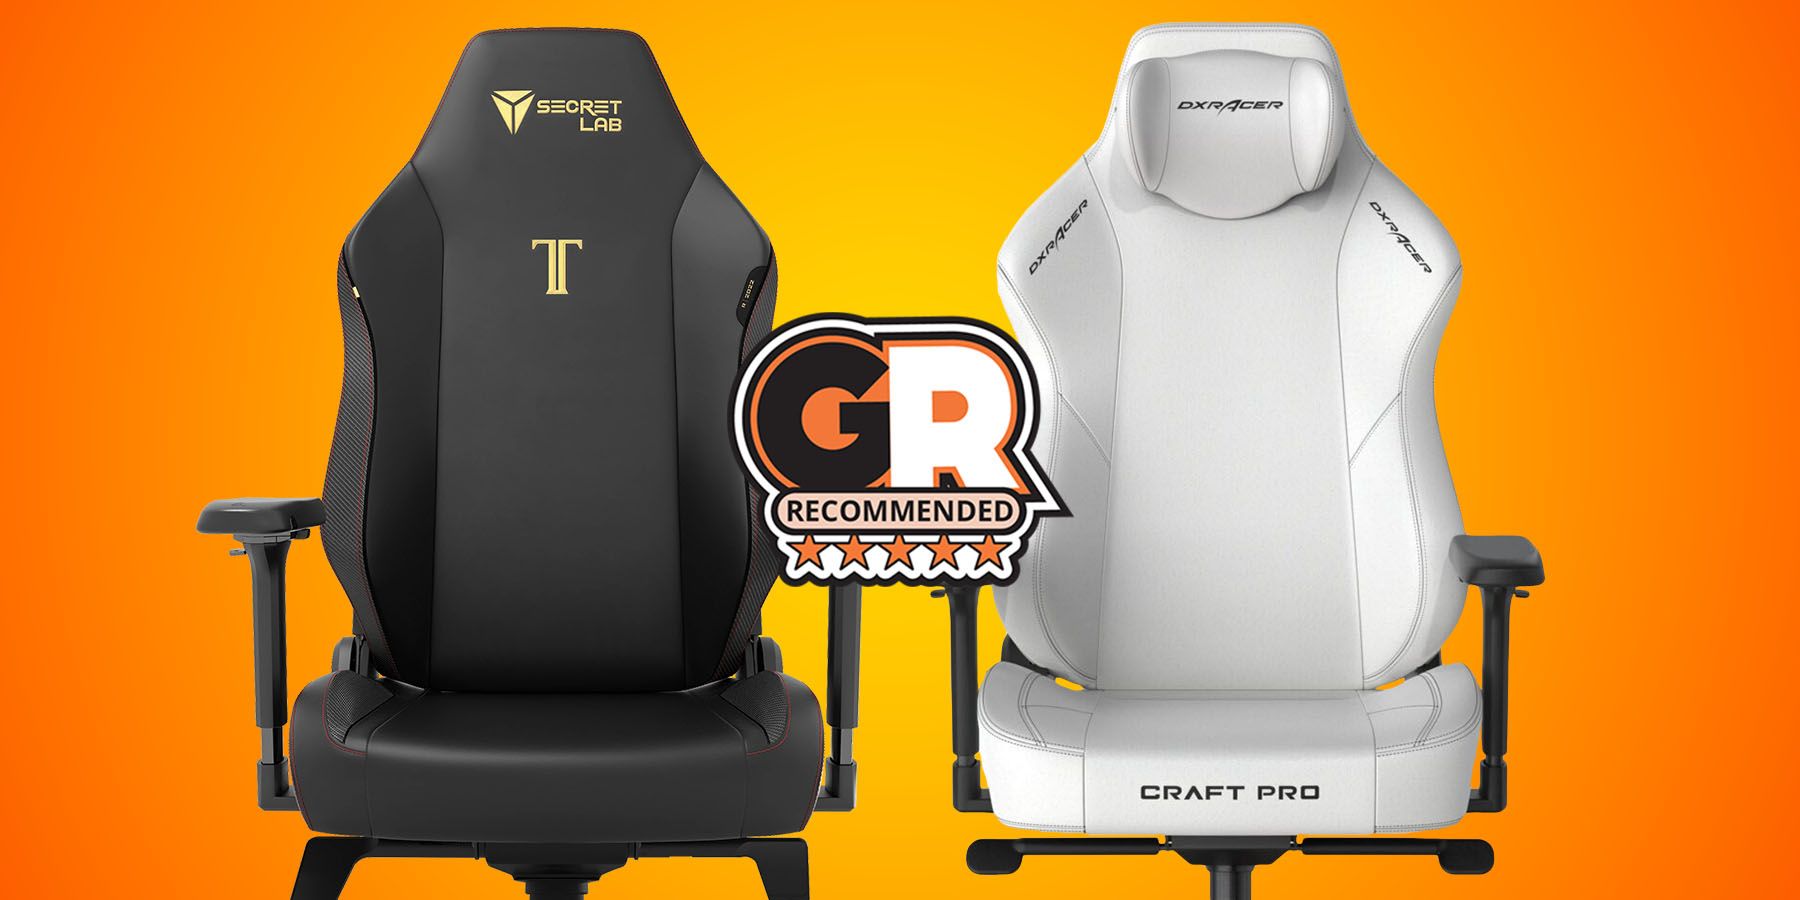 Secretlab vs. DXRacer: Which Gaming Chair Brand Should You Get? Thumb